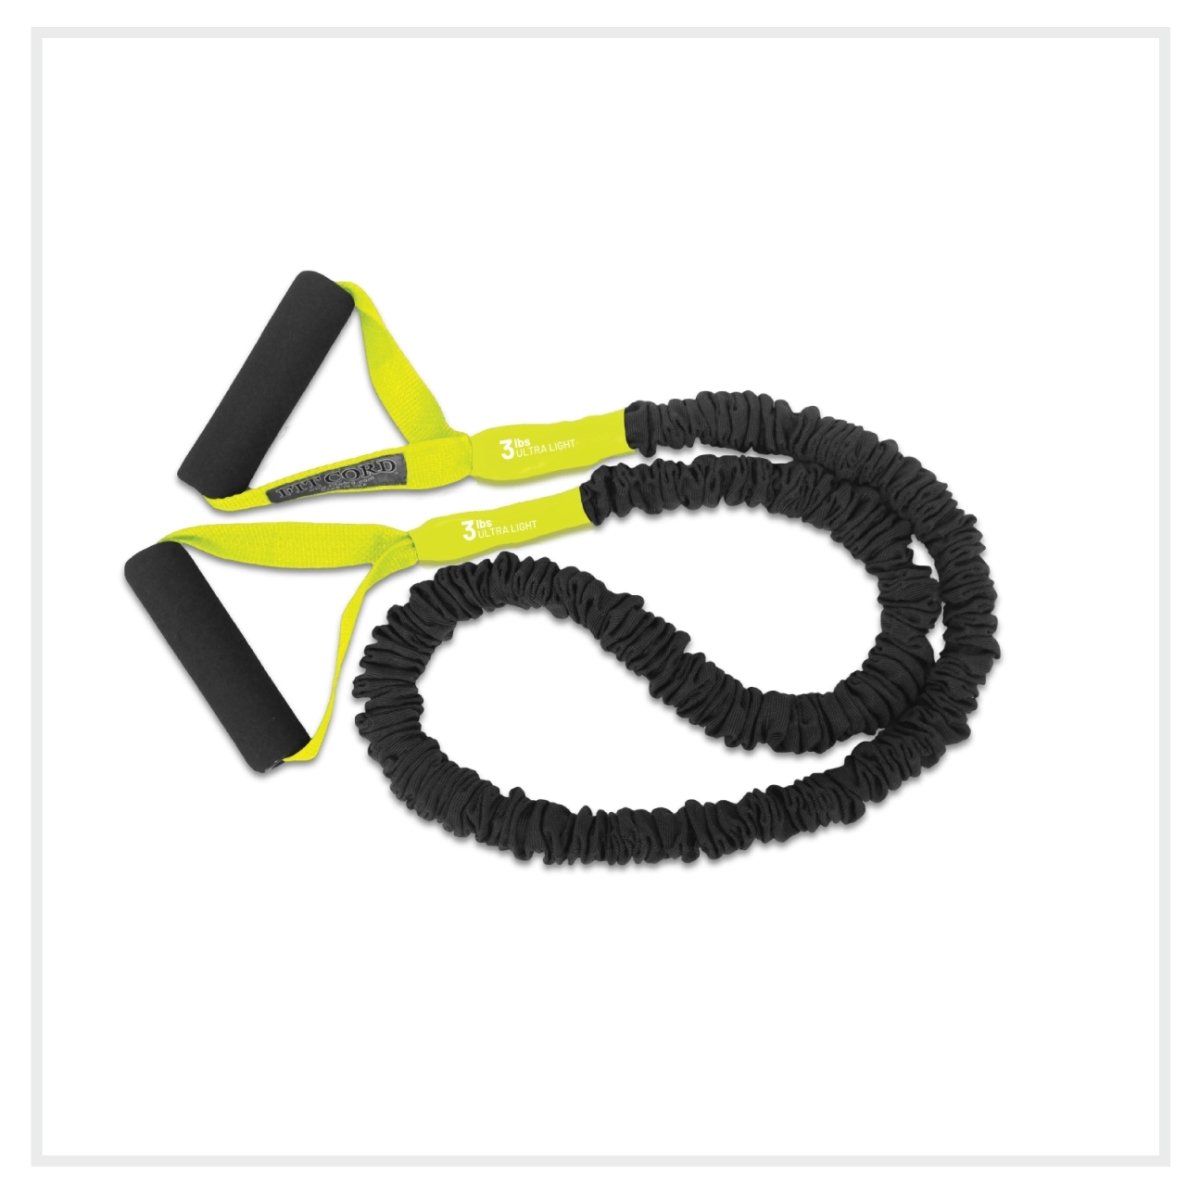 FitCord Resistance Band- 6ft Ultra Light (3lb)